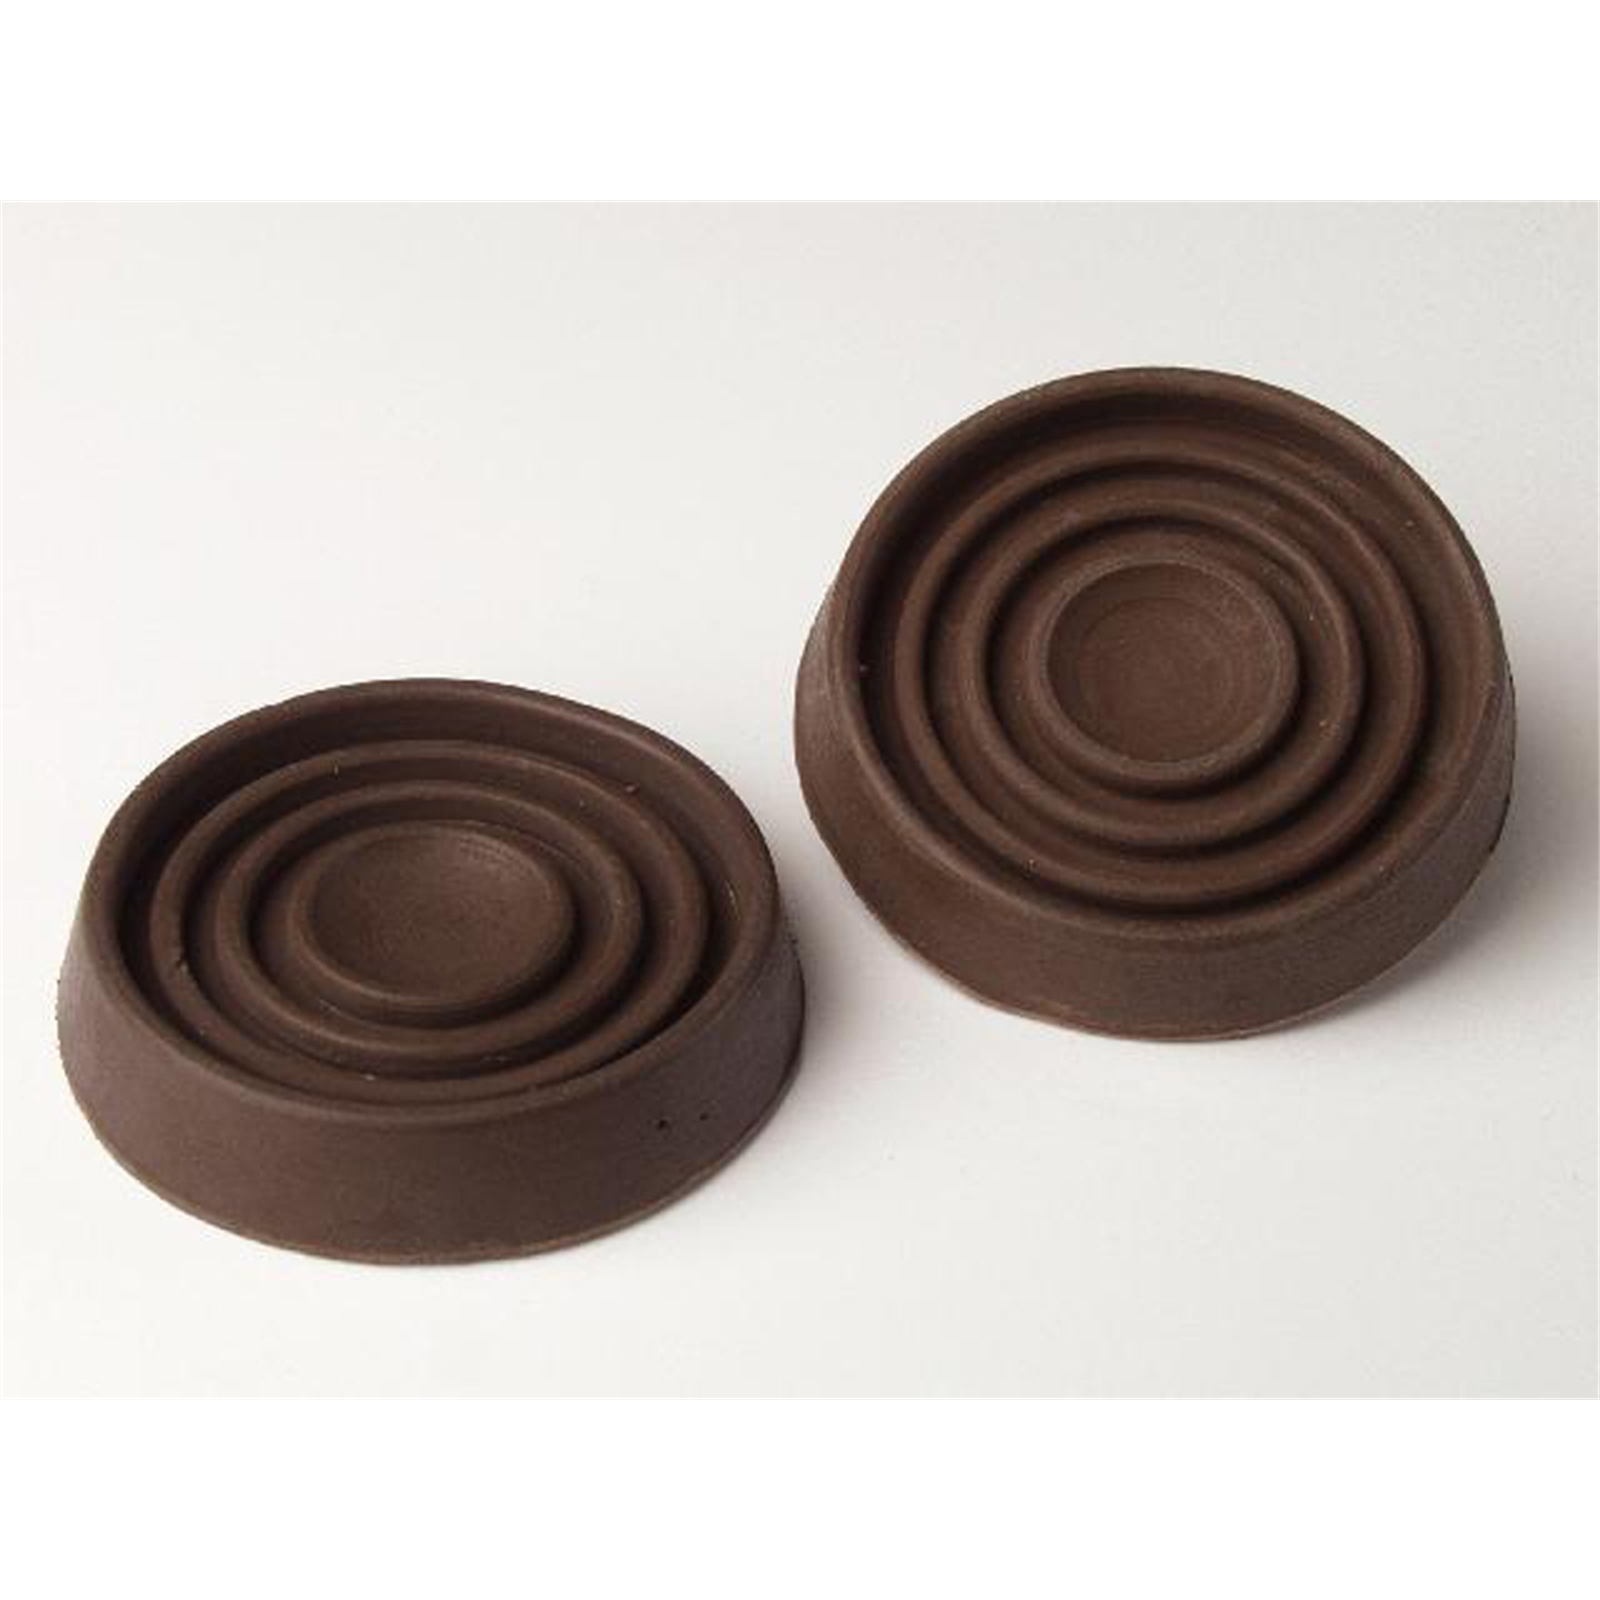 TIC 44mm Brown Rubber Base Round Castor Cup - 4 Pack